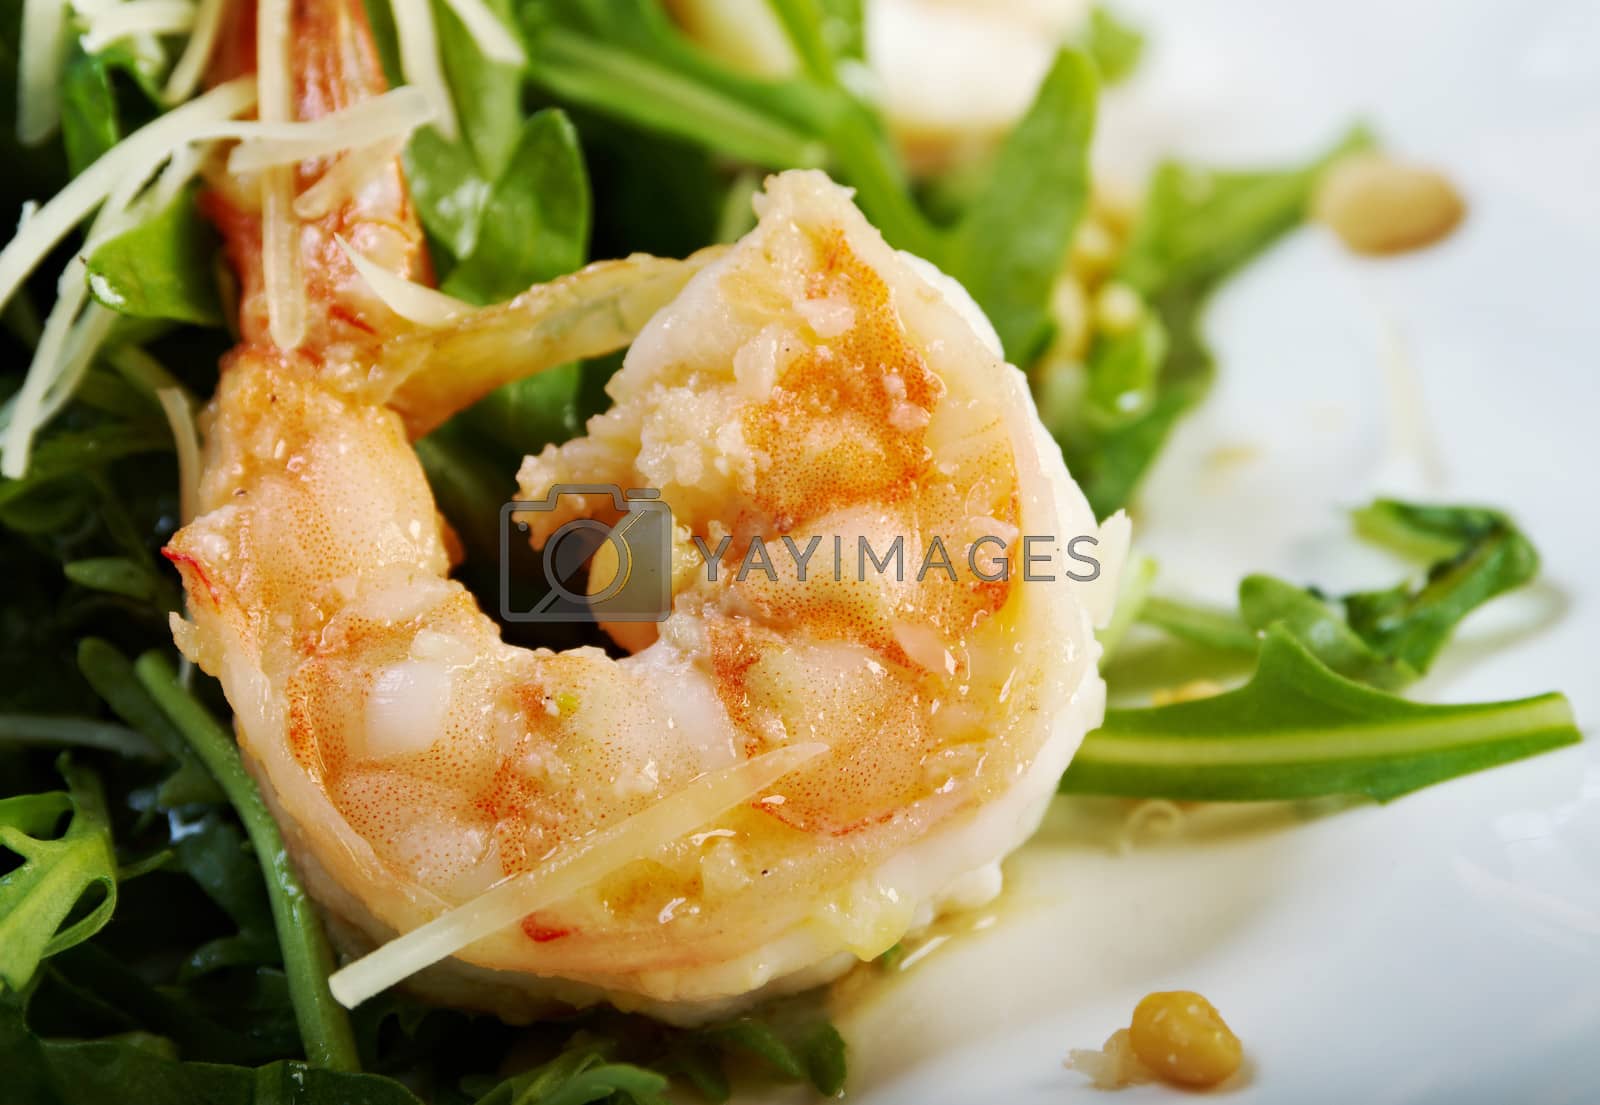 Royalty free image of arugula salad with prawn  by Fanfo